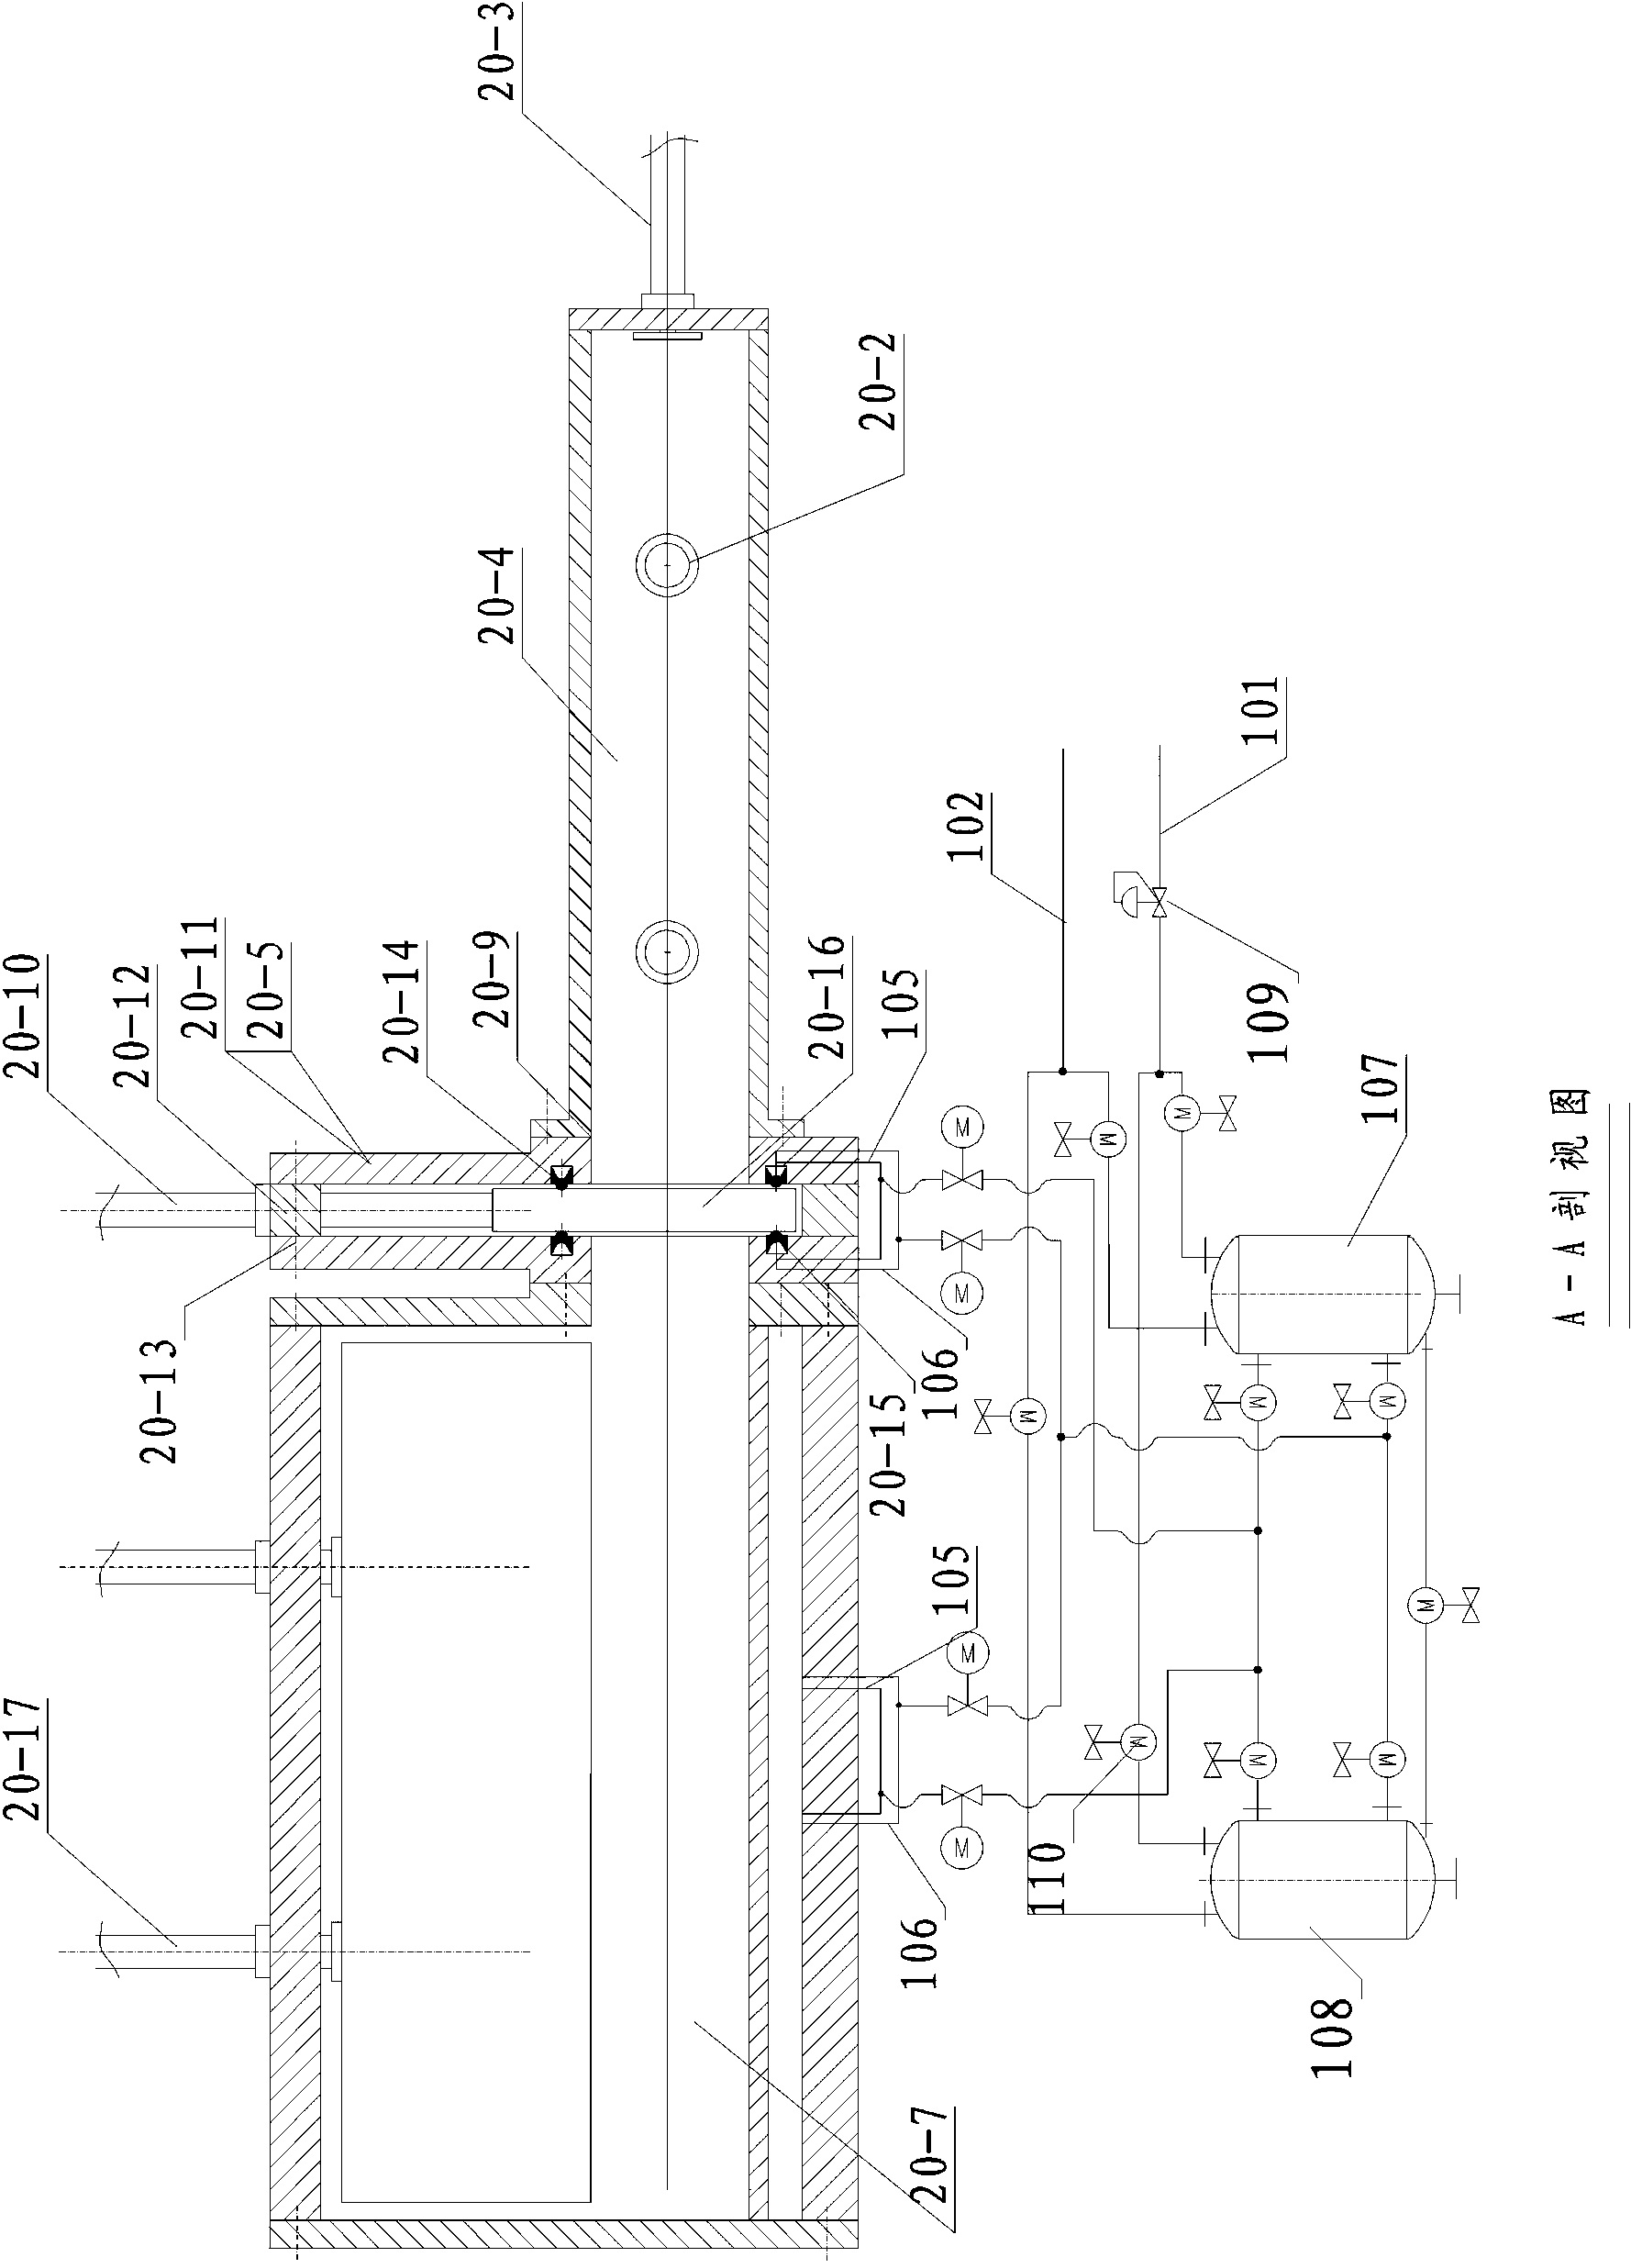 Processing equipment capable of achieving continuous sterilization and water bath cooling